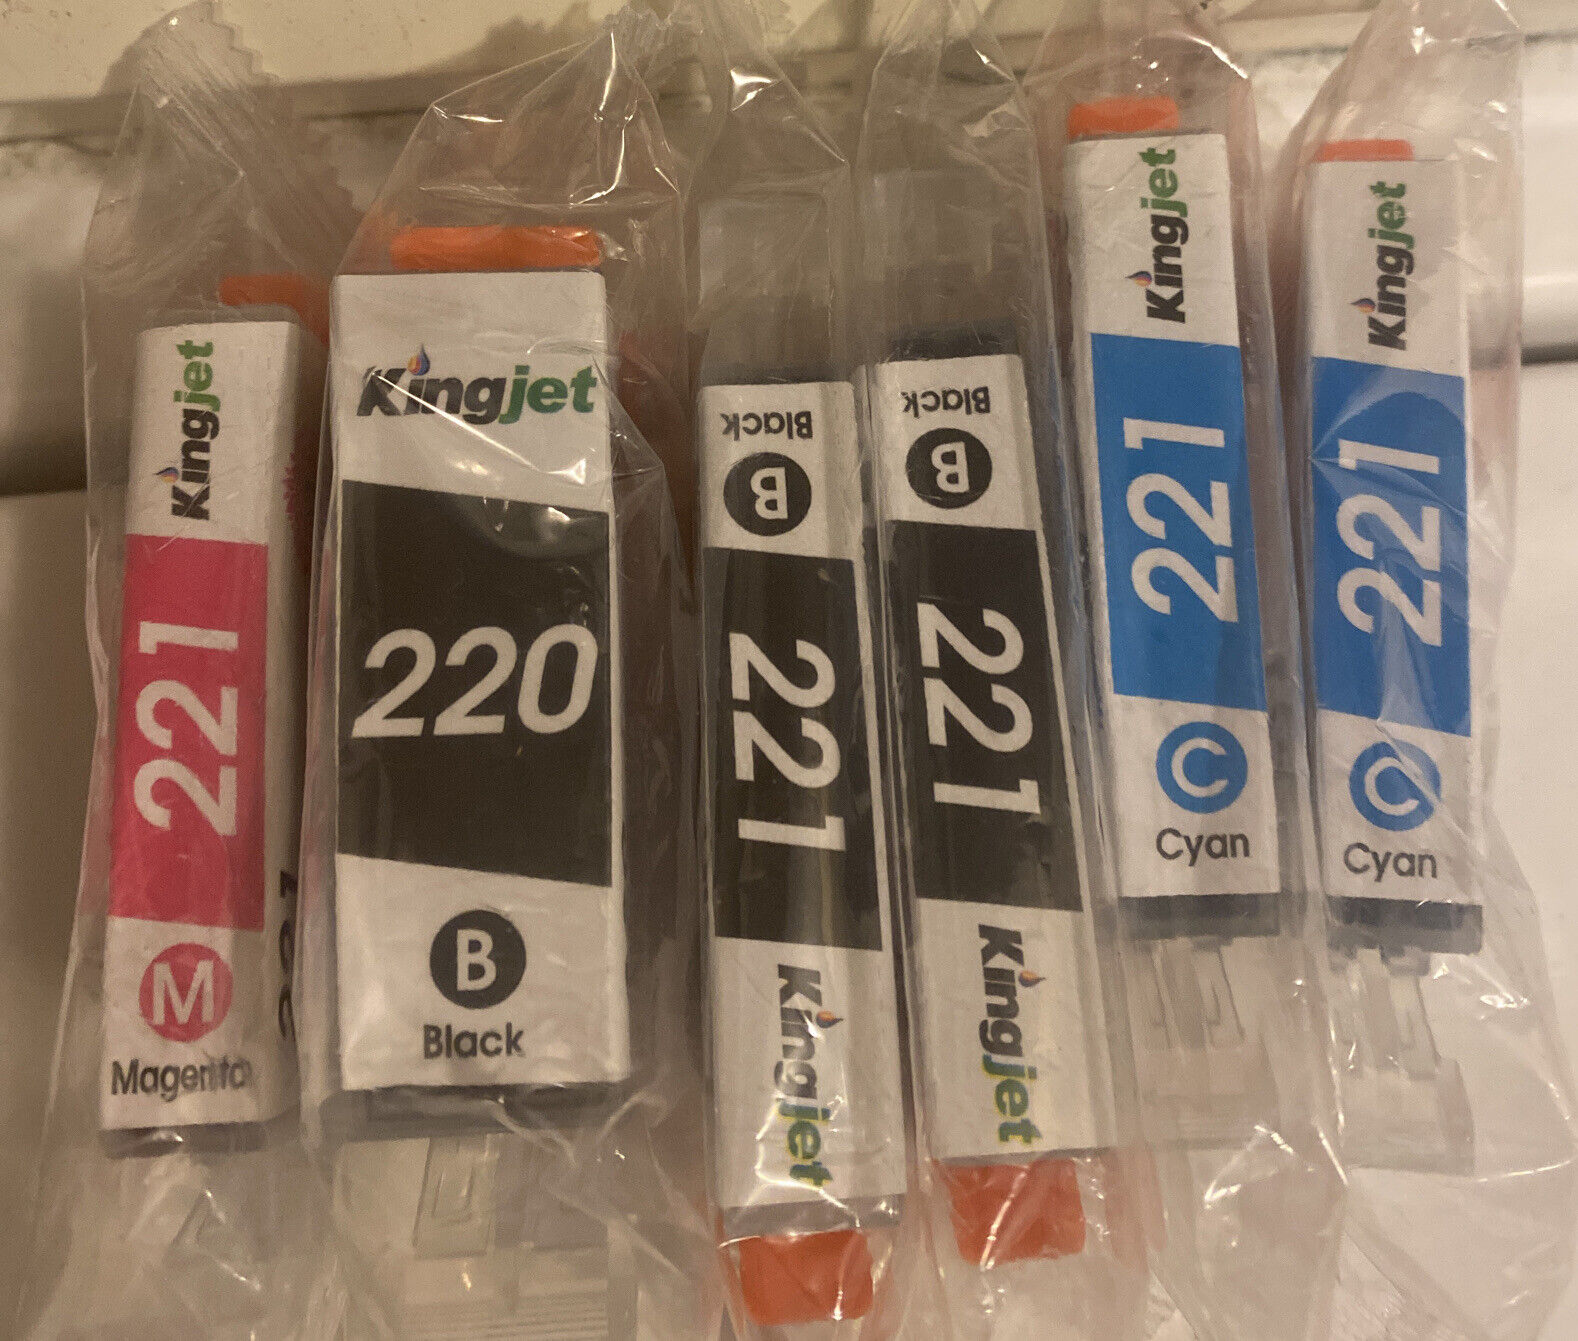 6 Pack,  Canon Compatible Ink Cartridges - KingJet 220/221,   Same as Picture.